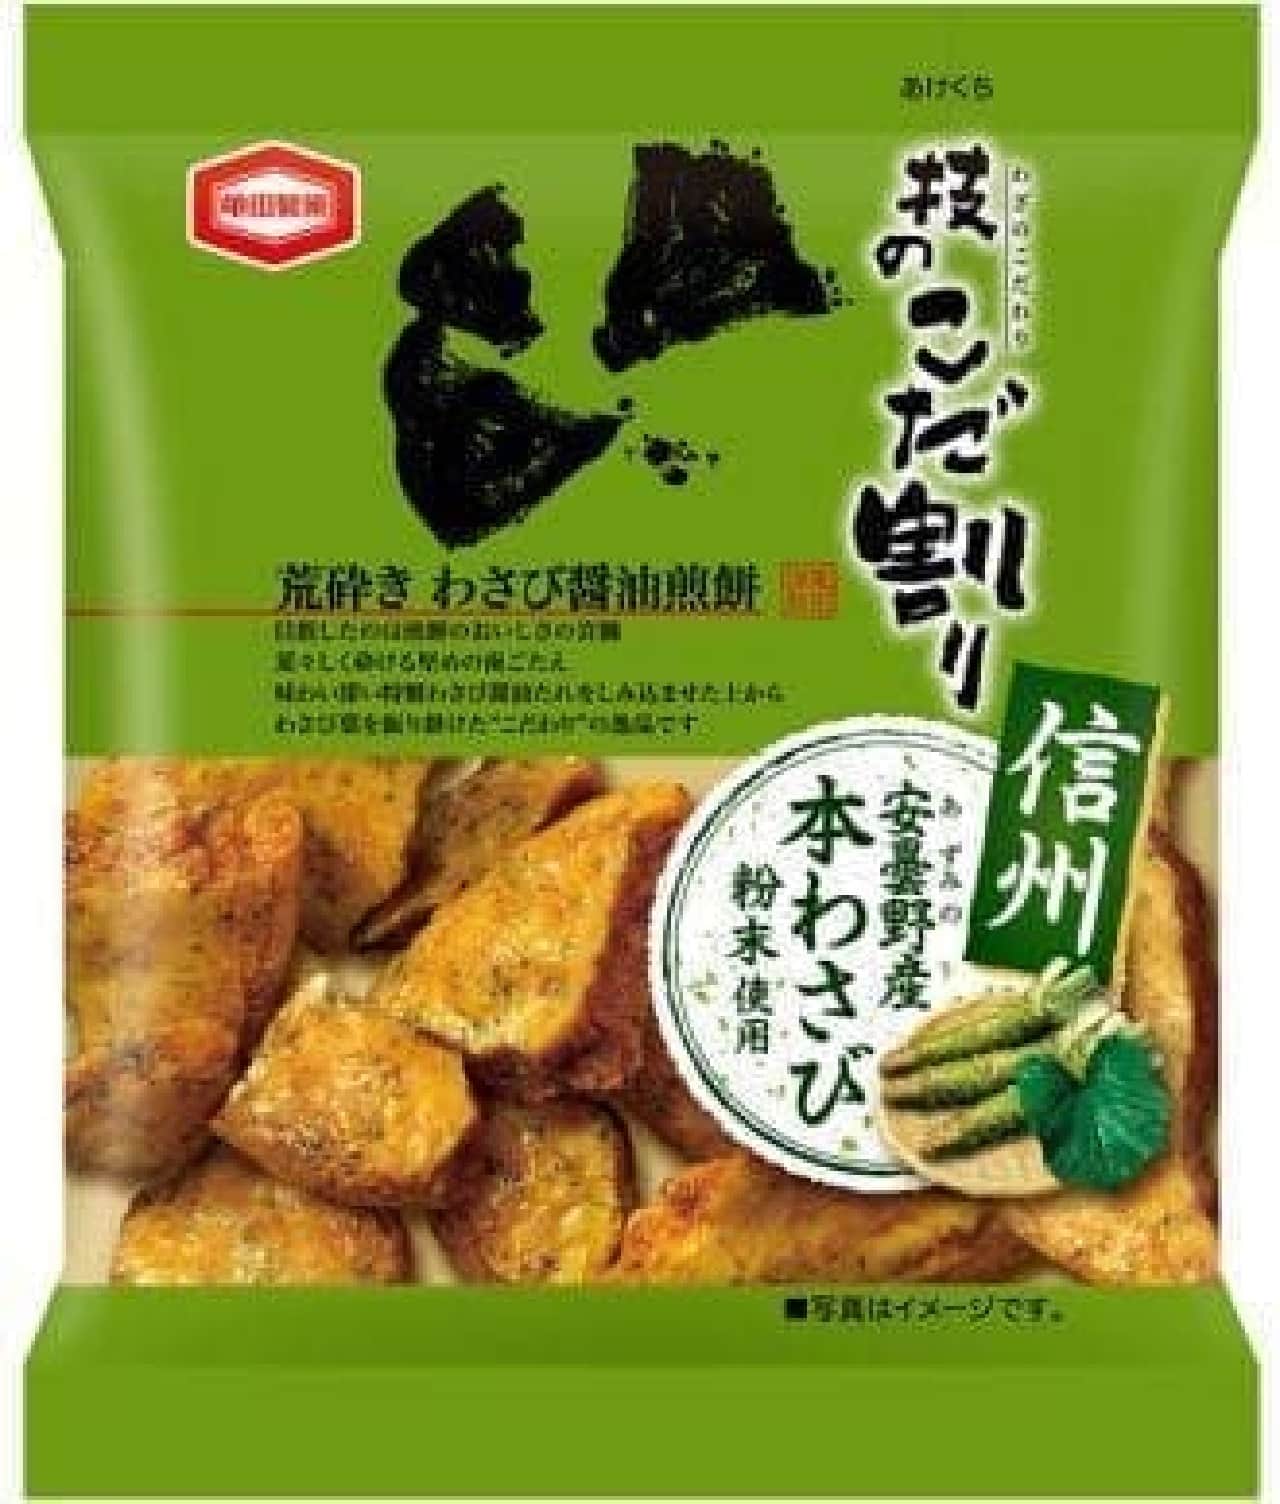 Introducing a refreshingly spicy wasabi flavor